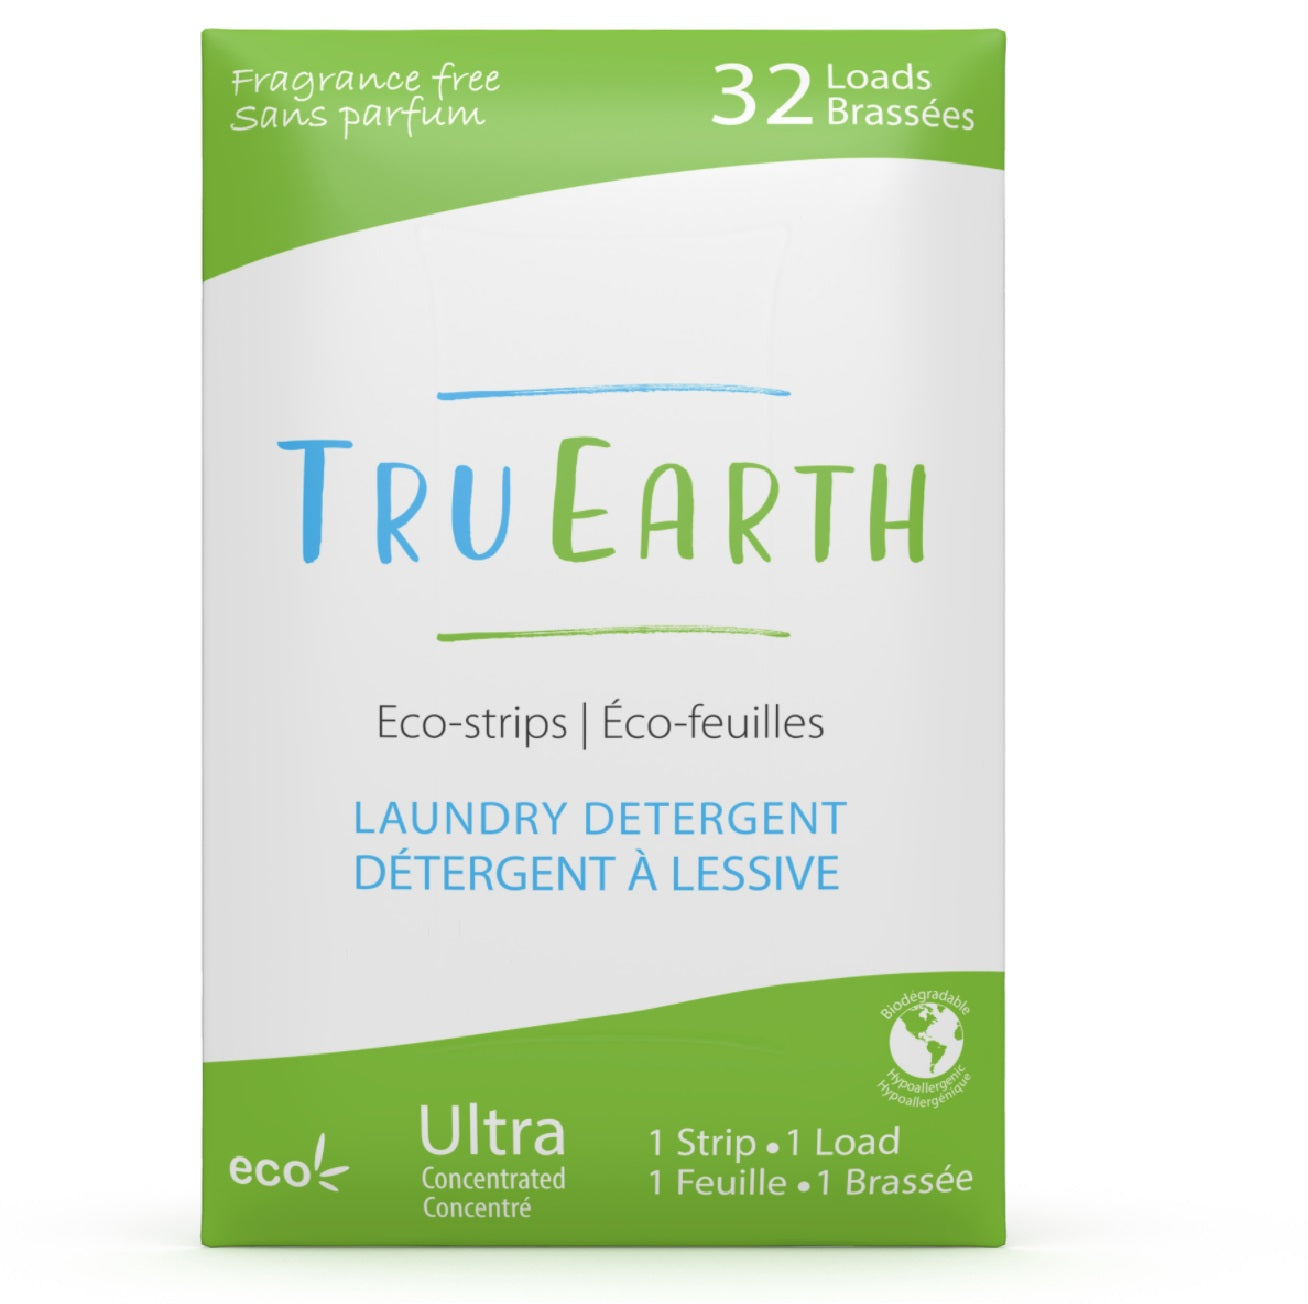 Eco-Strips Laundry Detergent - Fragrance Free